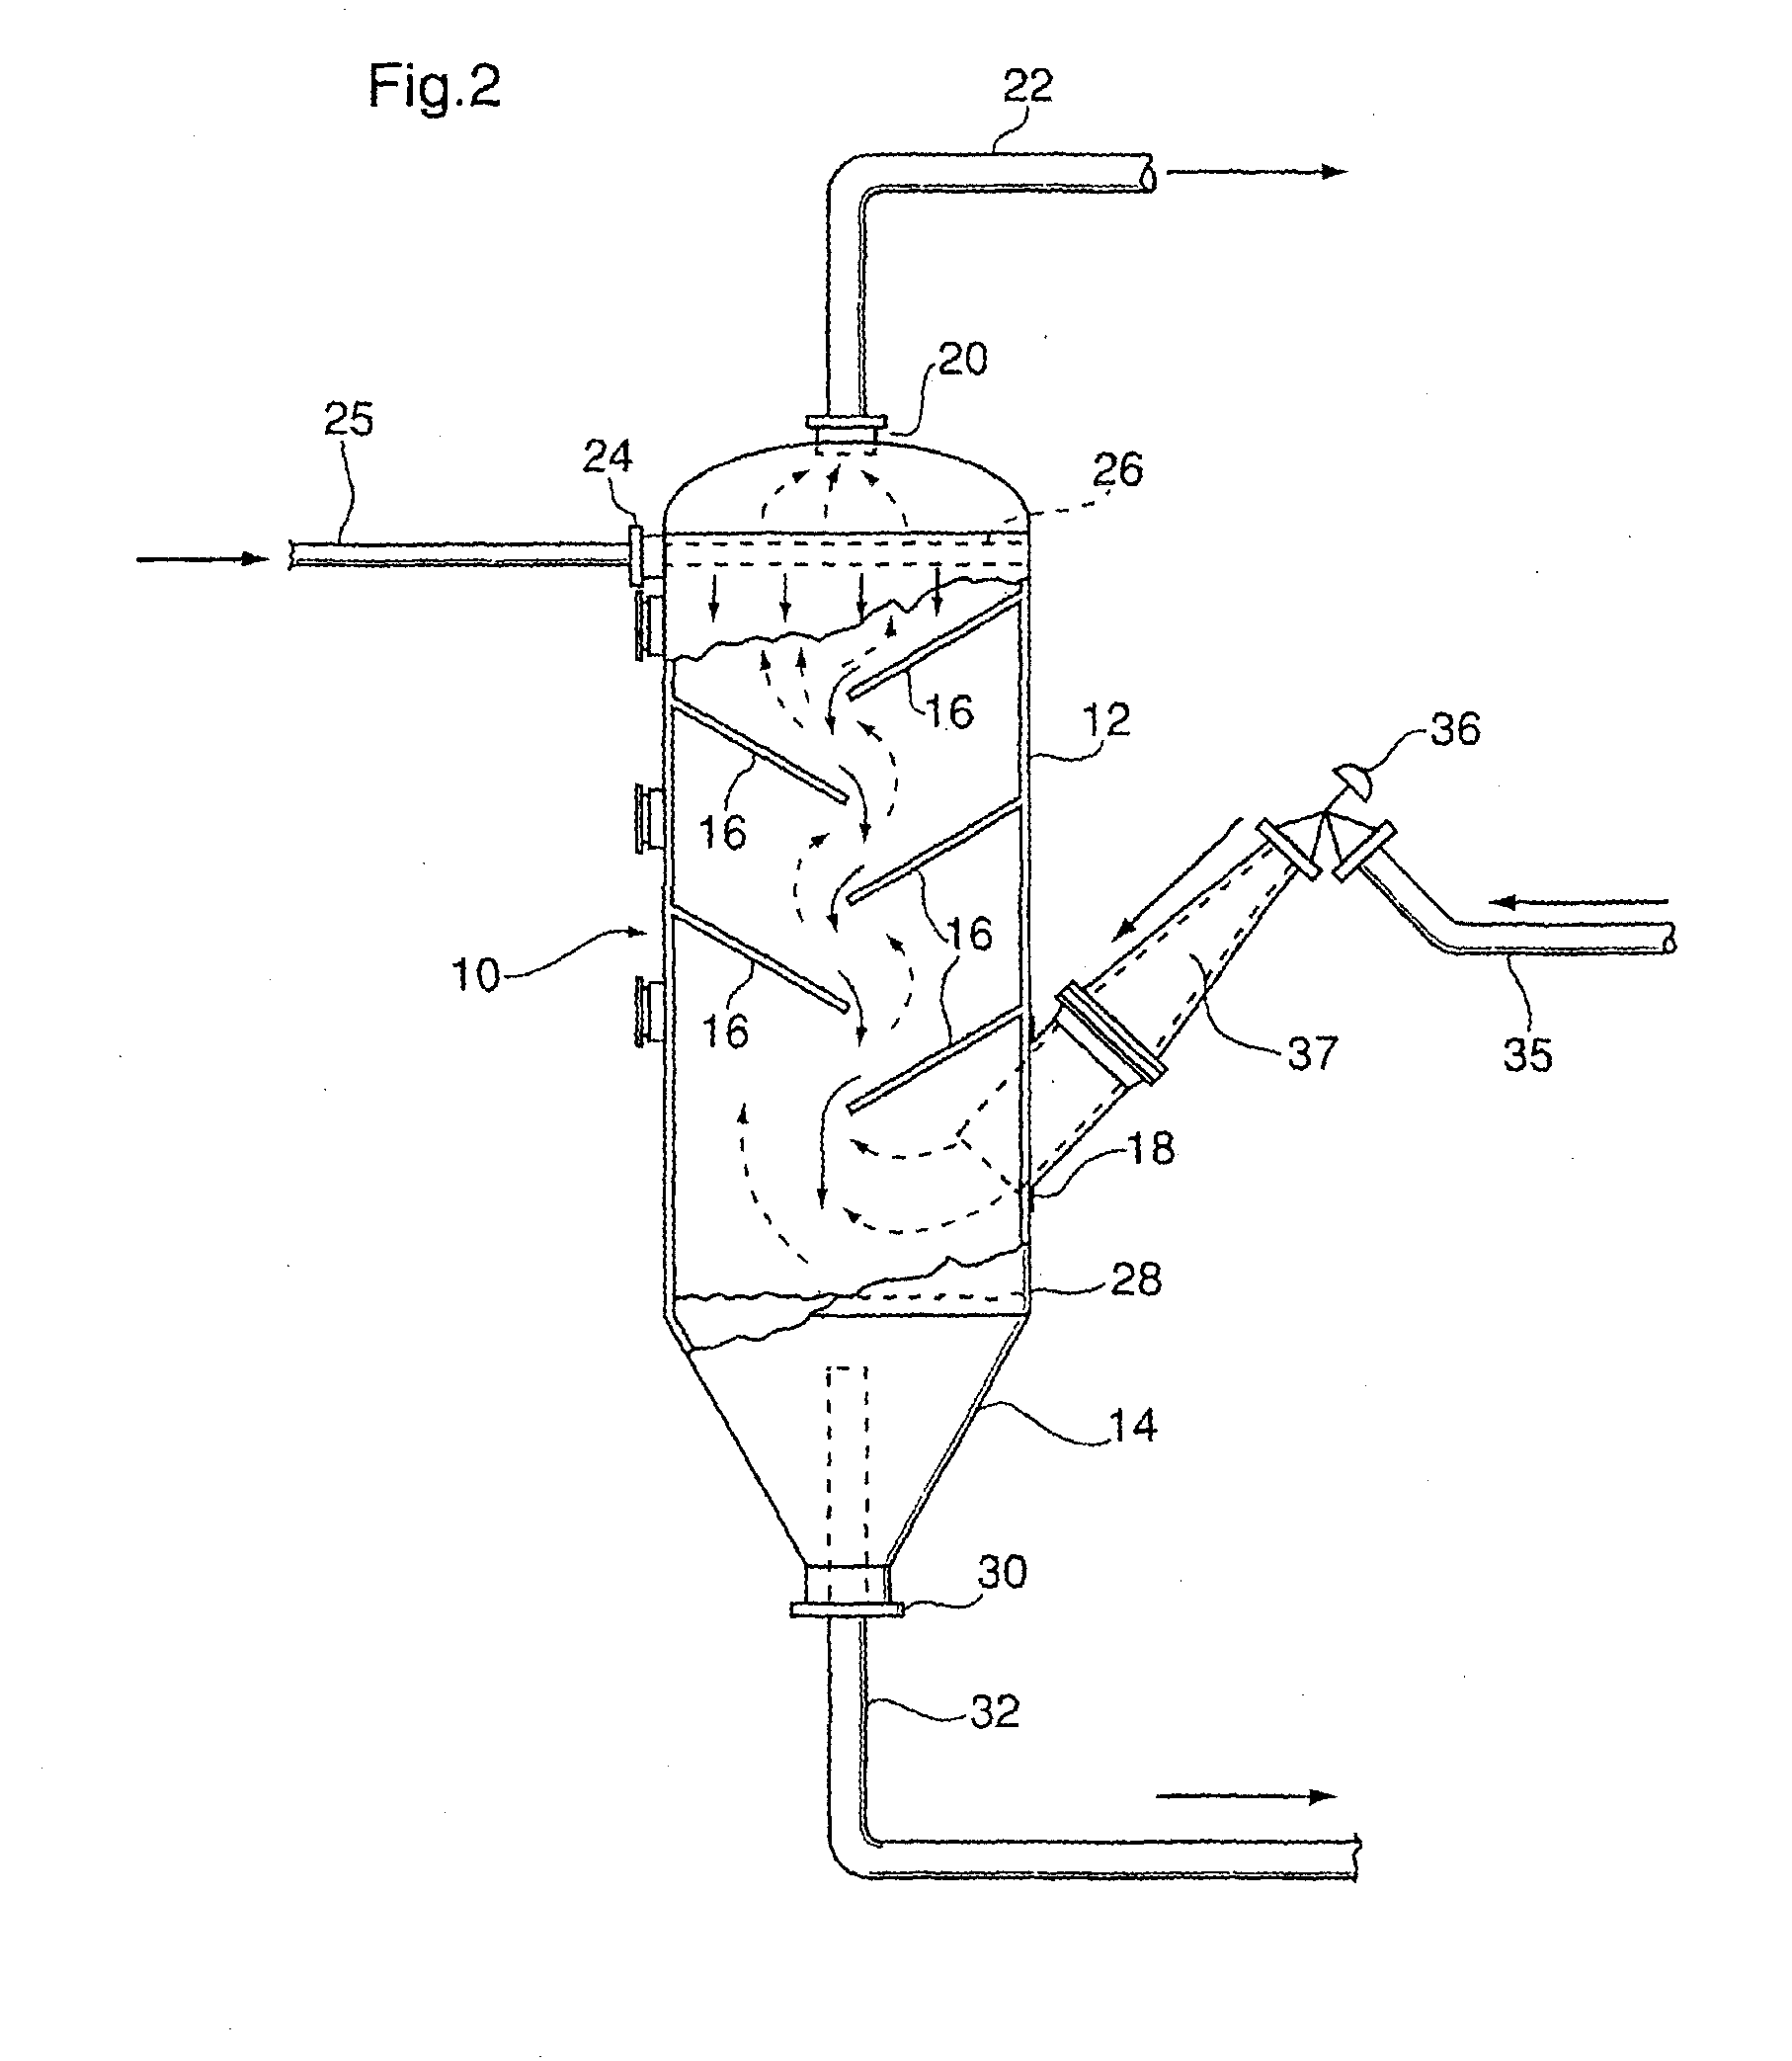 Method for removing sulfur from a gas stream